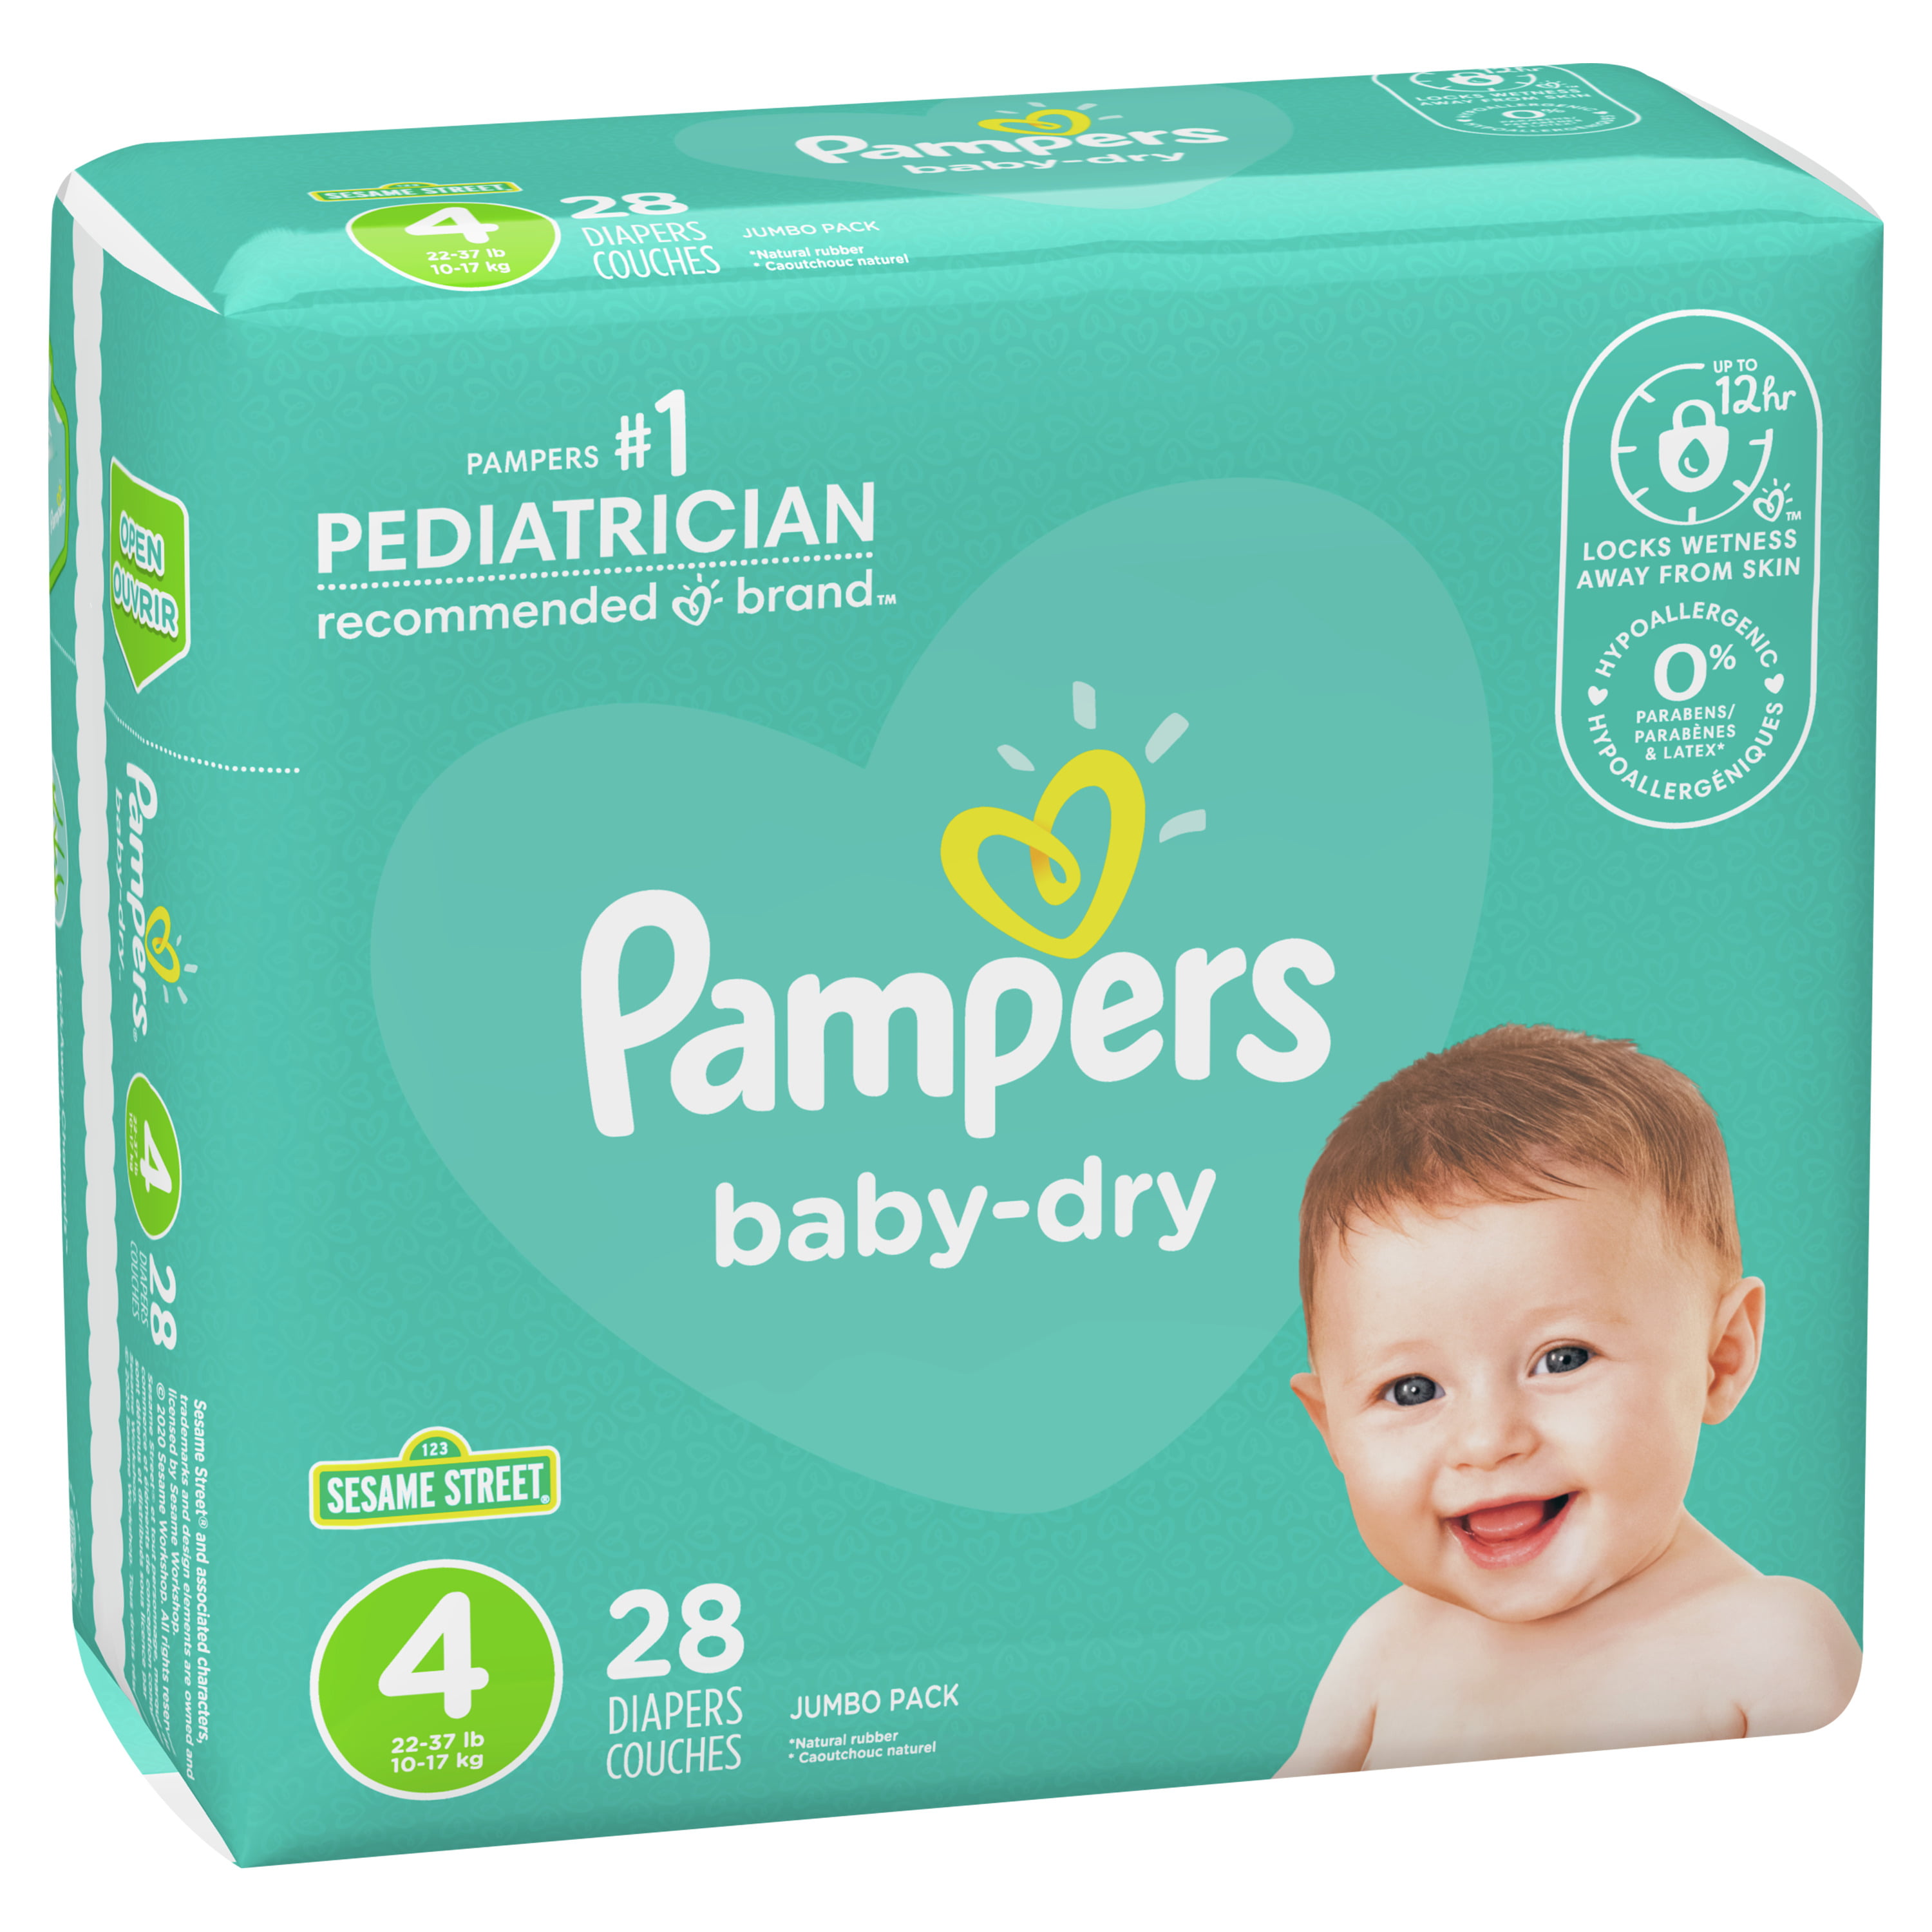 Cusco Lift Weinig Pampers Baby-Dry Extra Protection Diapers, Size 4, 28 Count - Walmart.com